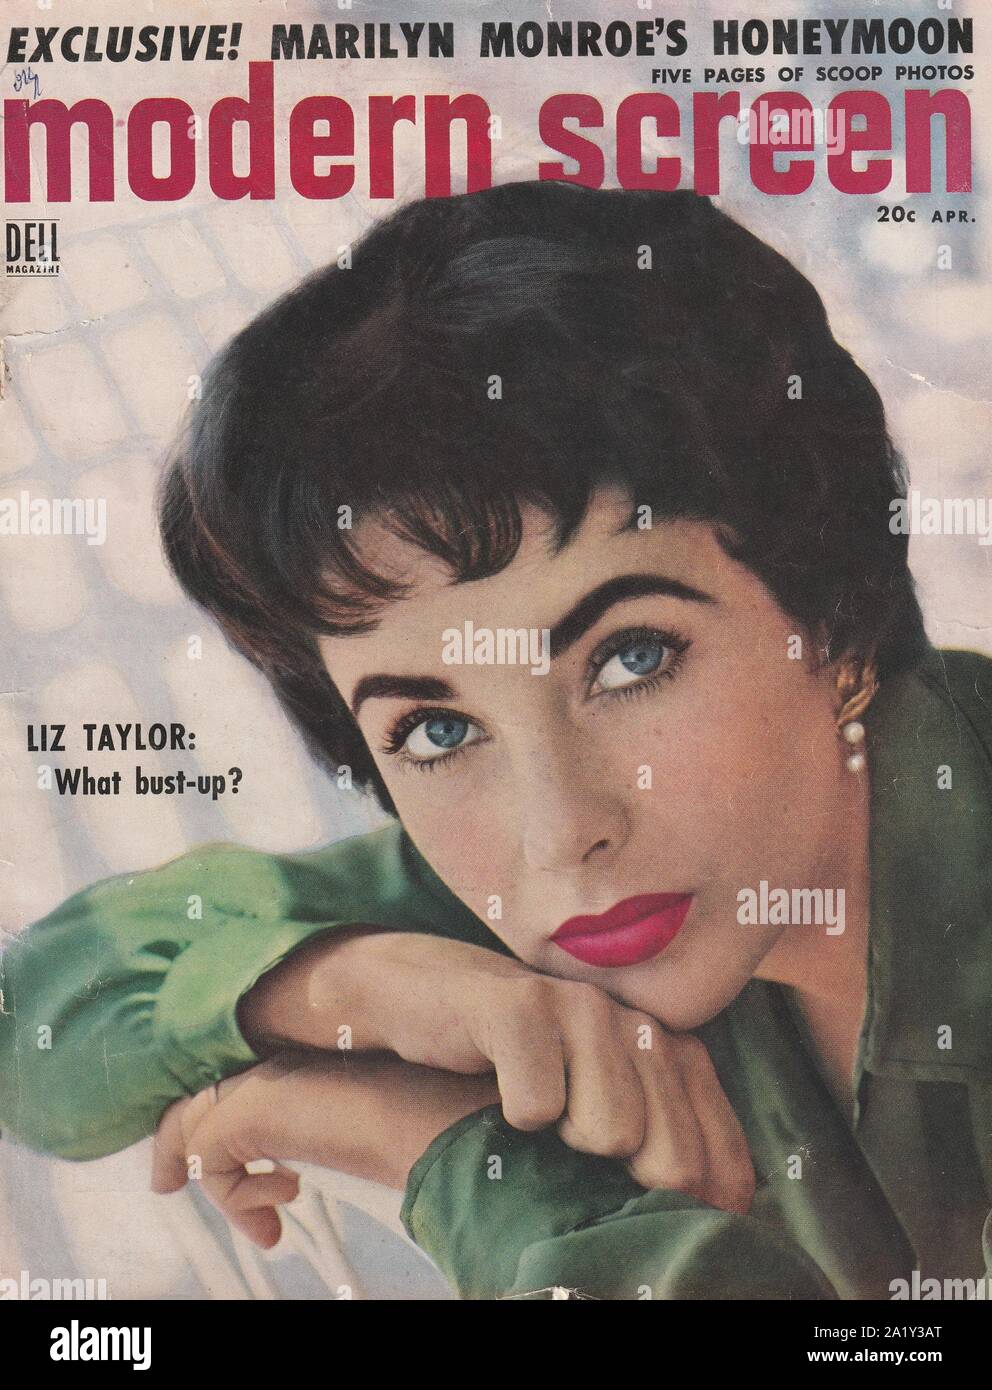 Elizabeth Taylor (1932-2011), British-born American film actress won Academy Awards as Best Actress in Butterfield 8, Who's Afraid of Virginia Woolf? Stock Photo